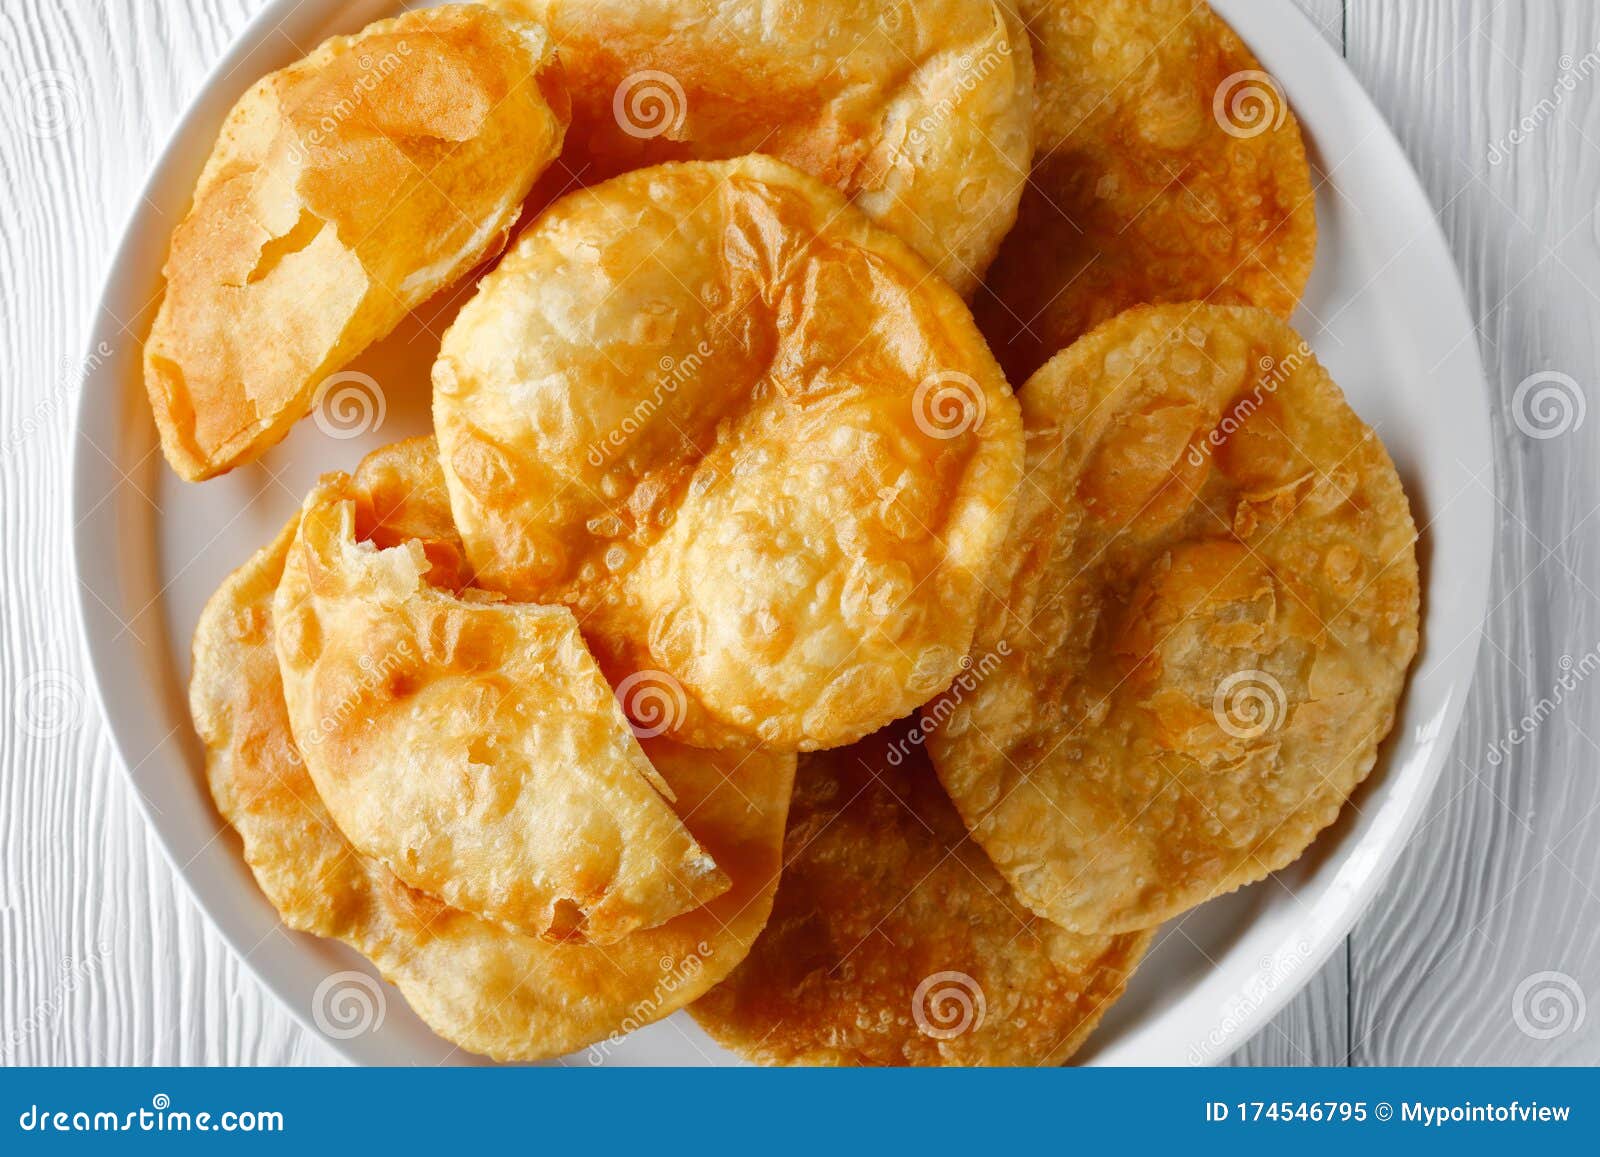 Close-up of Bhatura, Indian Deep Fried Bread Stock Image - Image of ...